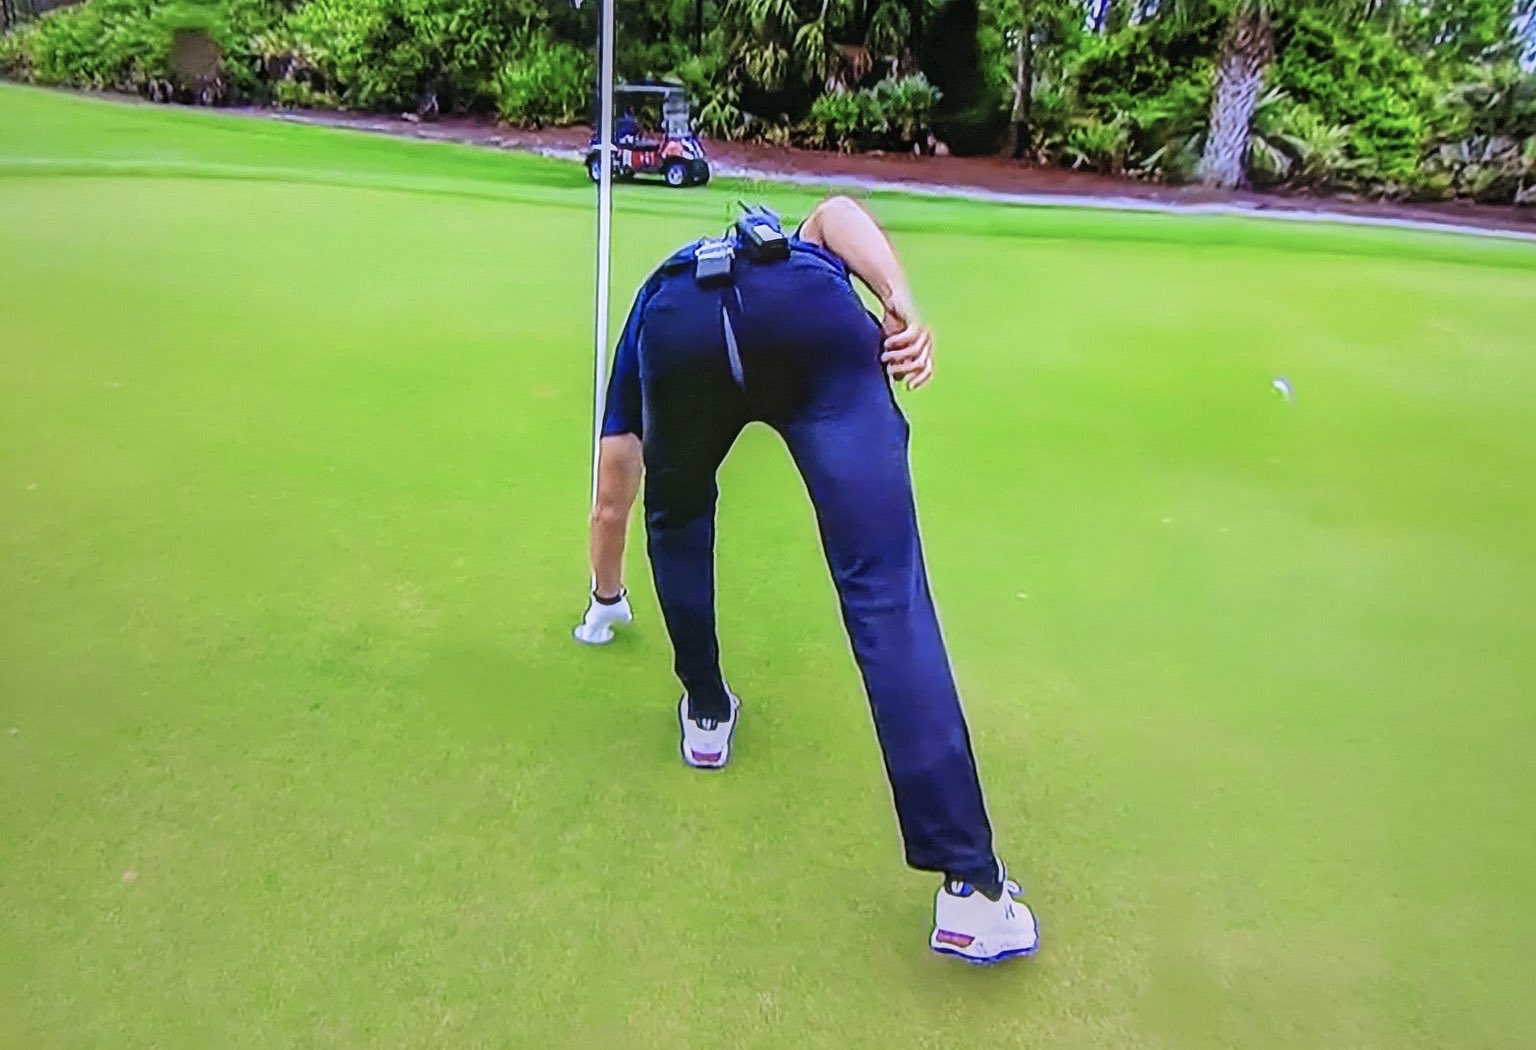 Tom Brady sinks it from the fairway then splits his pants taking the ball o...